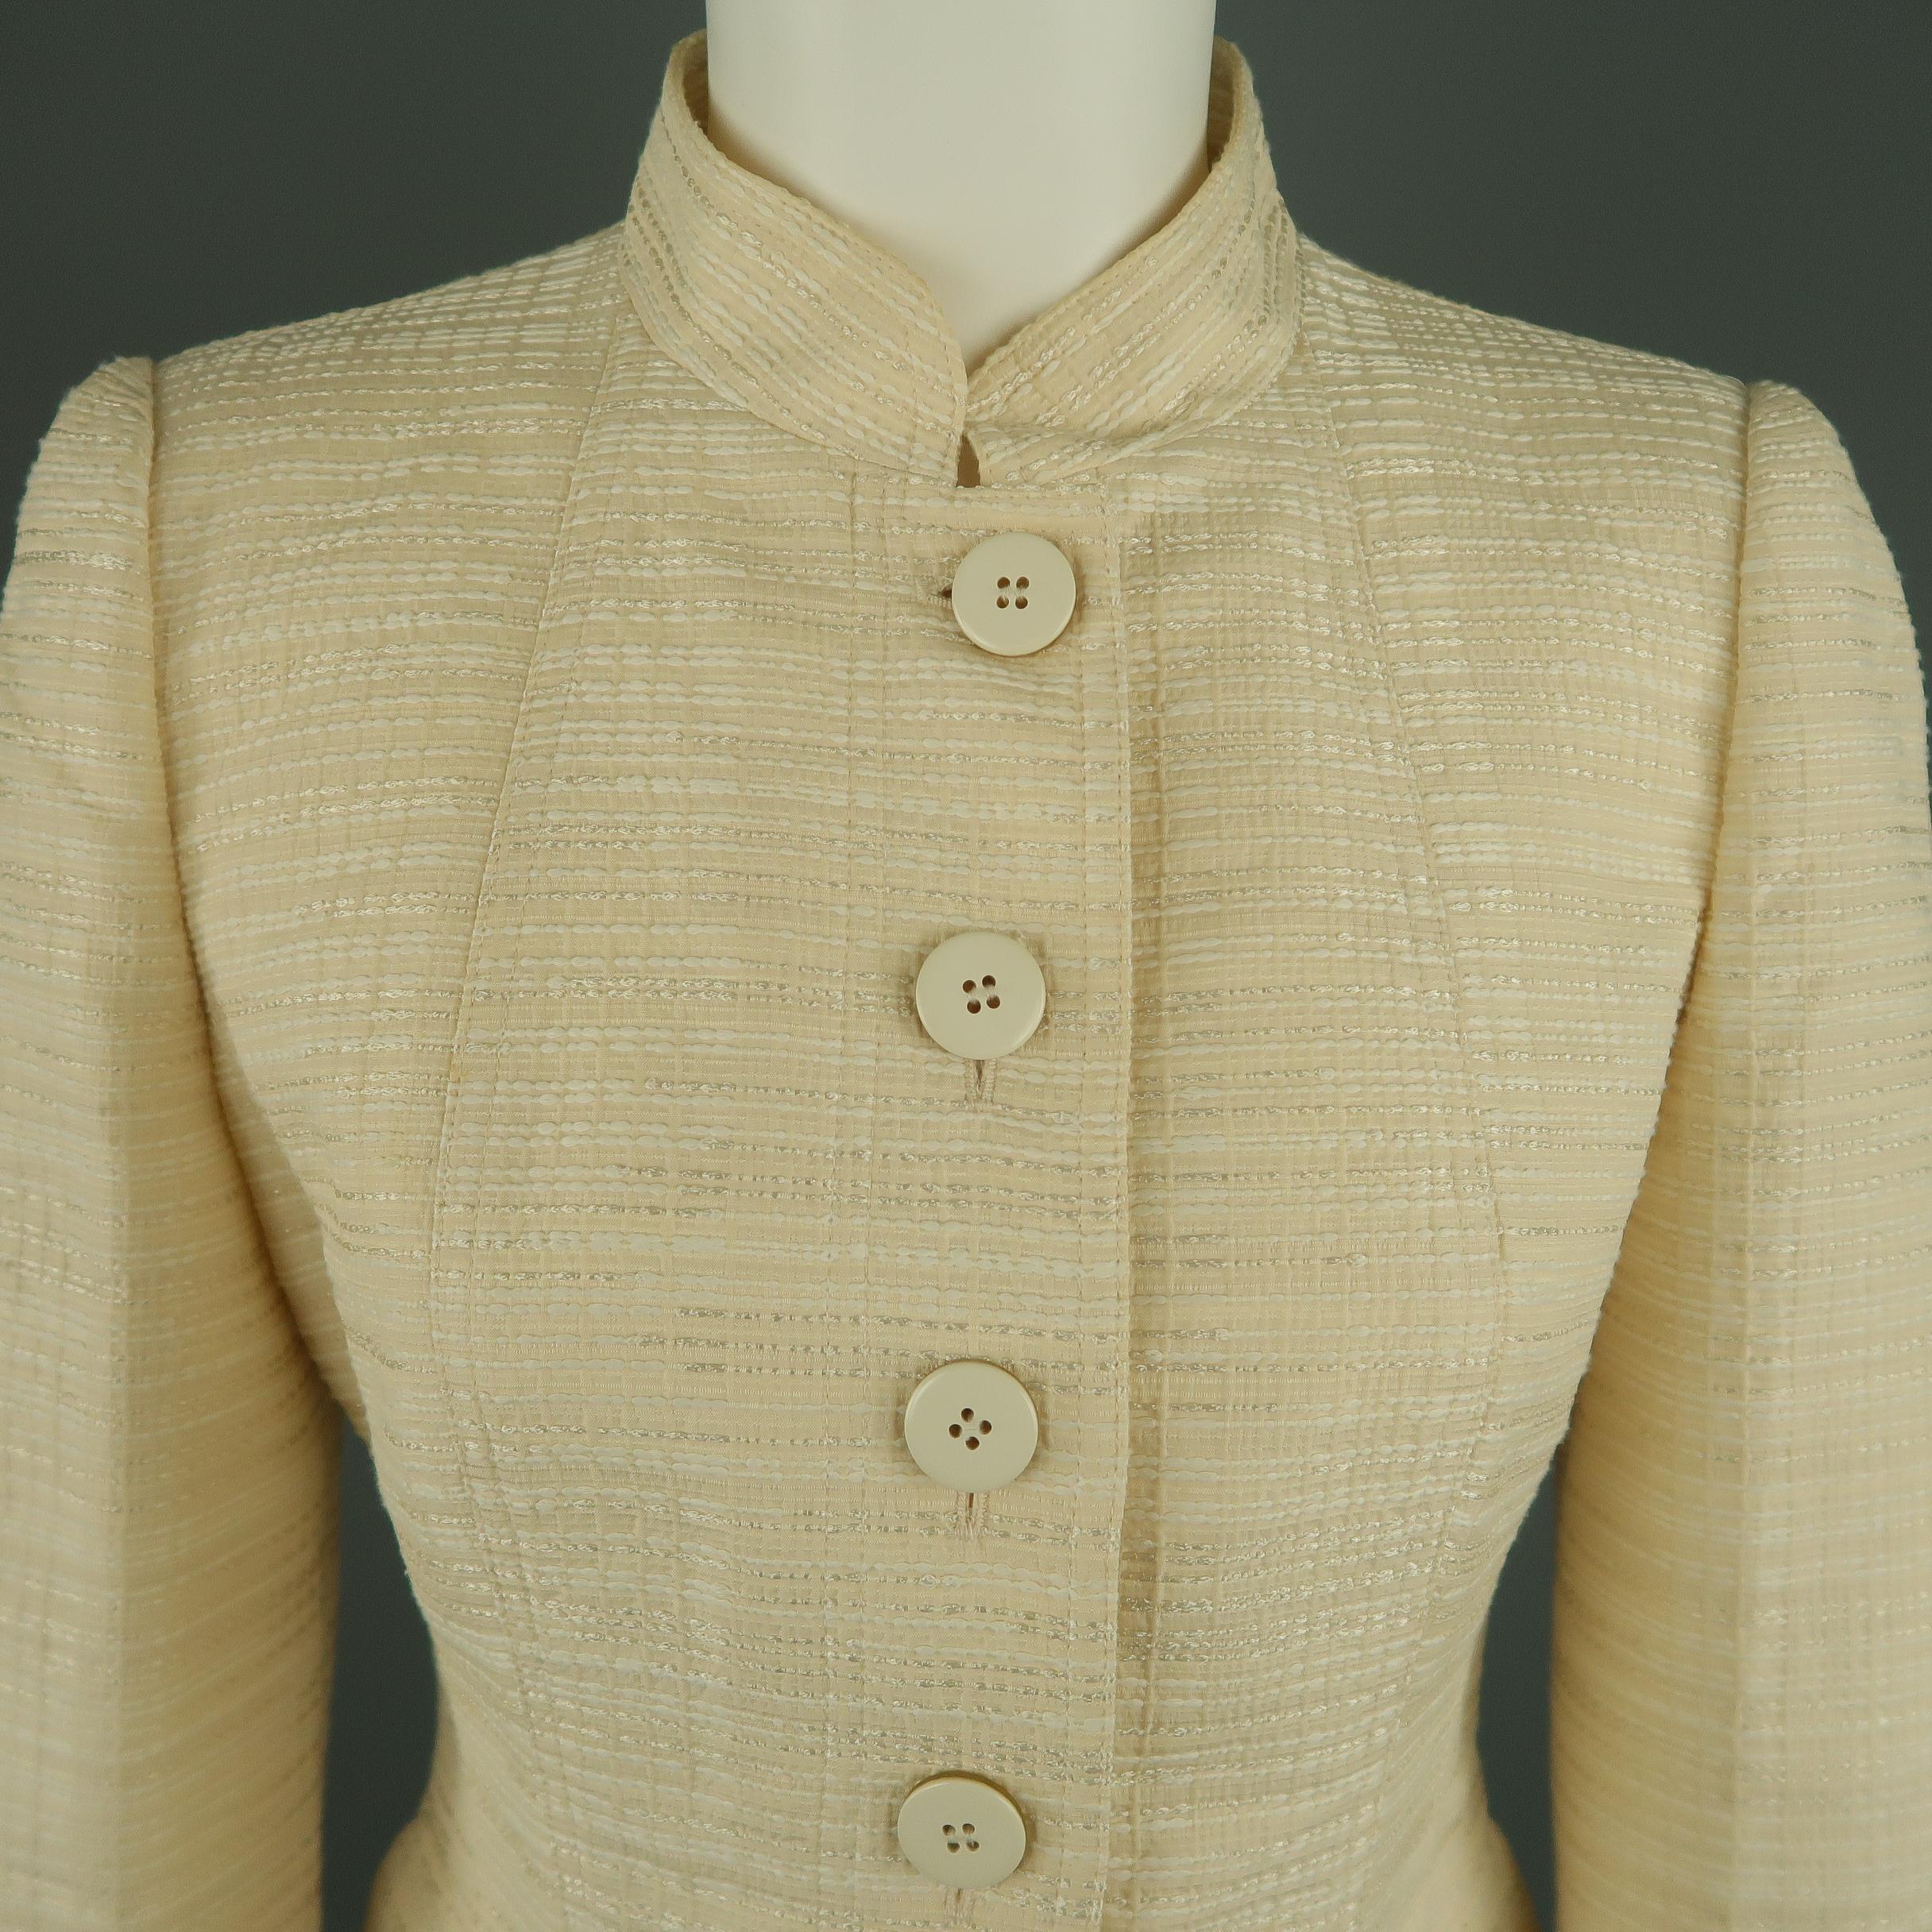 ARMANI COLLEZIONI jacket comes in cream stitch textured fabric with a Mandarin collar, singe breasted button up front, and flap pockets. Made in Italy.
 
Excellent Pre-Owned Condition.
Marked: 6
 
Measurements:
 
Shoulder: 14 in.
Bust: 36